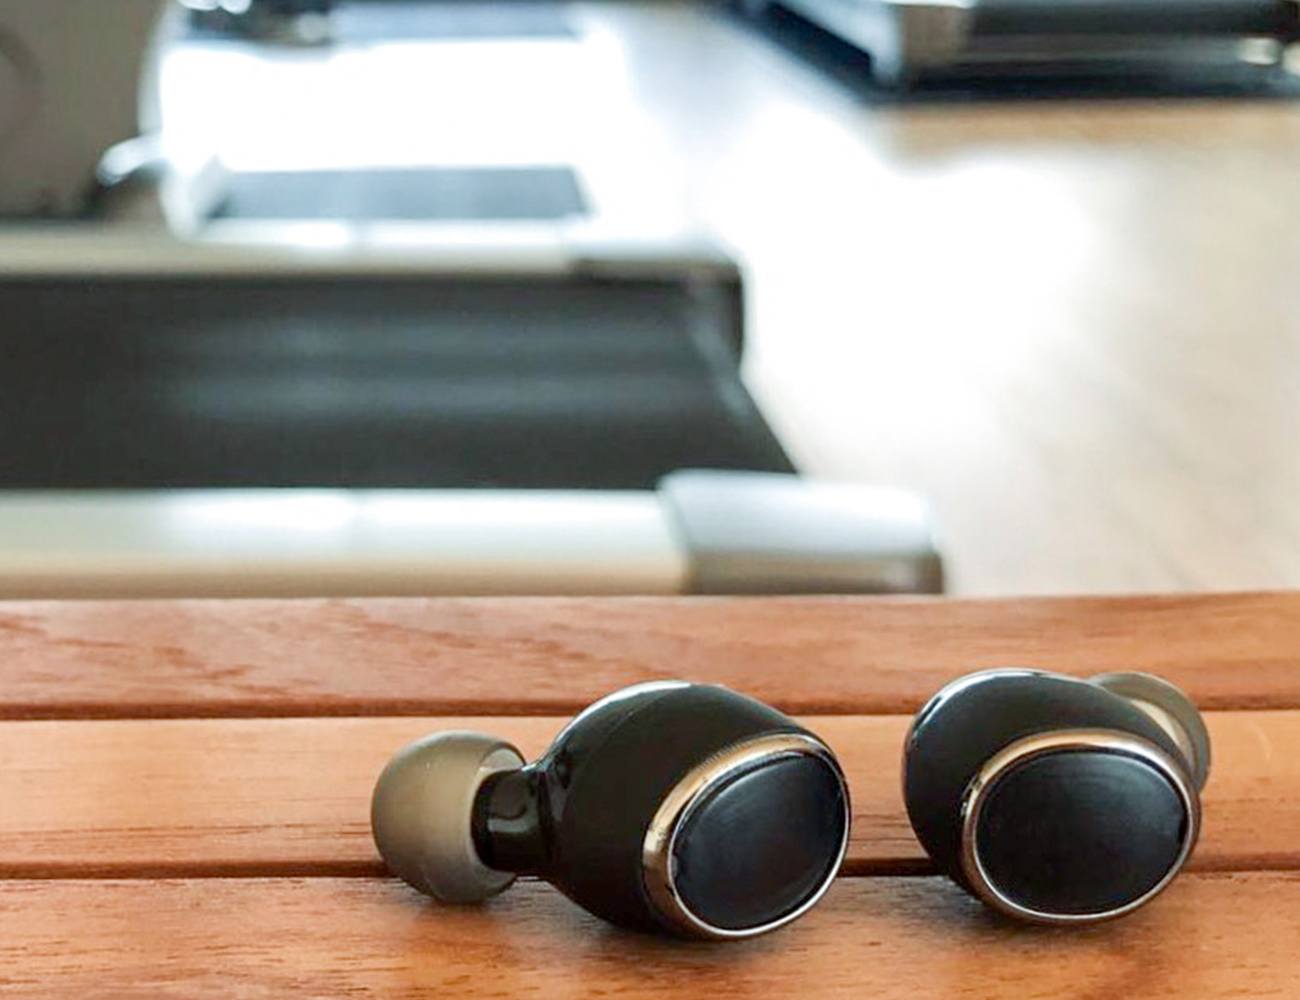 SonaBuds - Smallest Stereo Earbuds w HD Audio & Mic » Gadget Flow